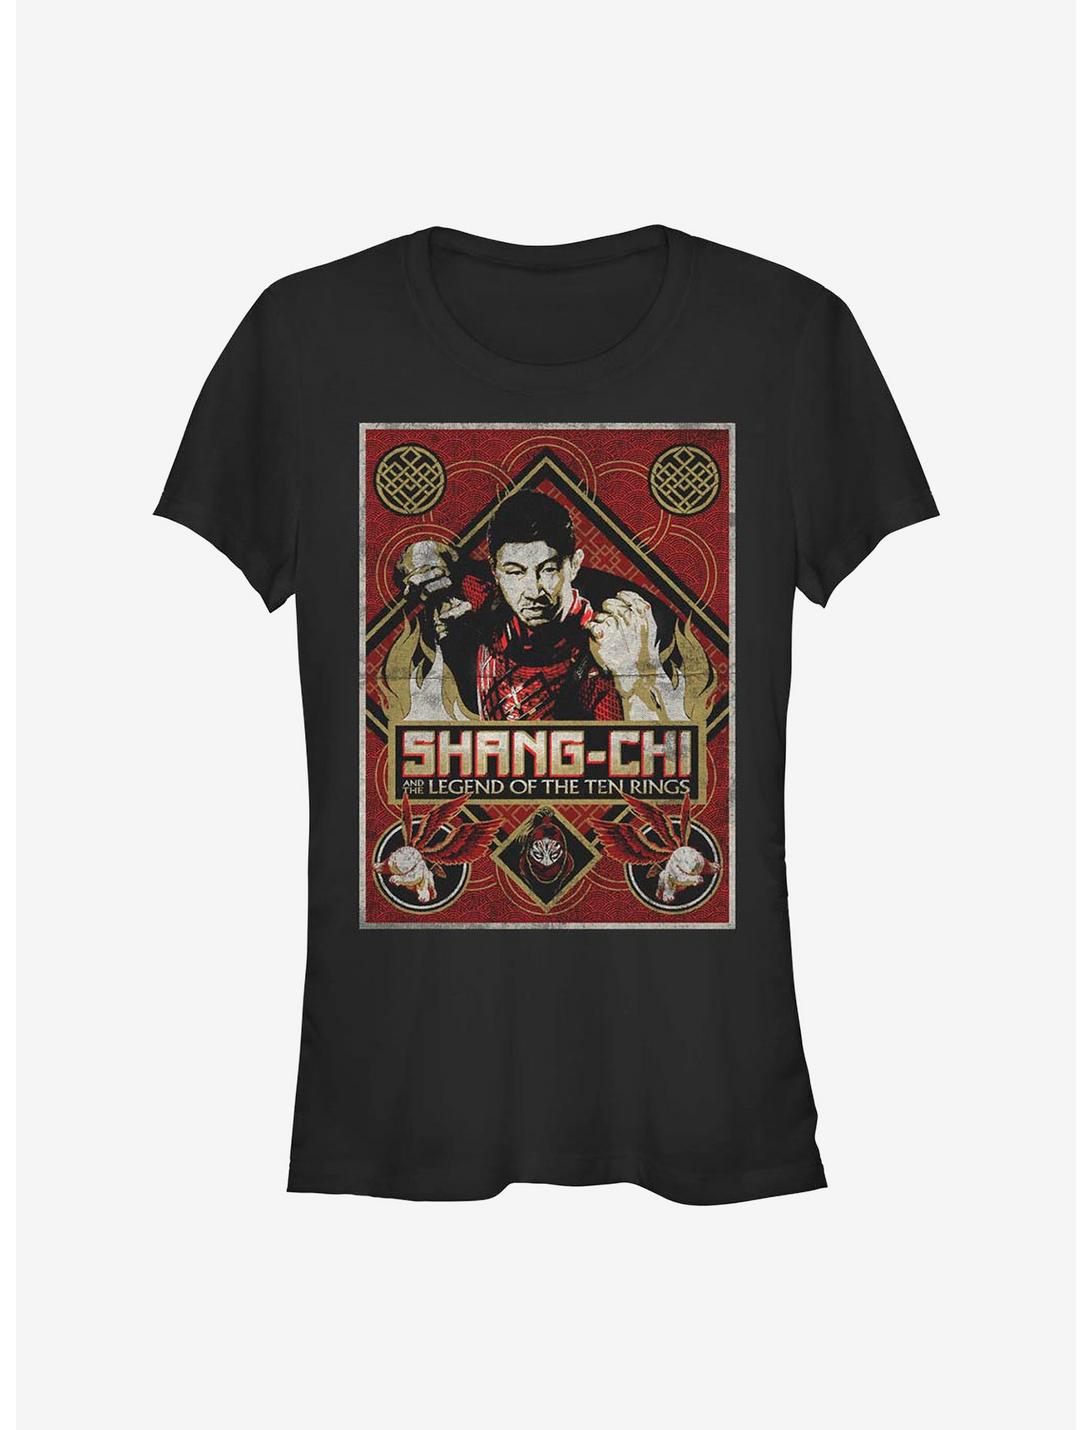 Marvel Shang-Chi And The Legend Of The Ten Rings Defiance Girls T-Shirt, BLACK, hi-res